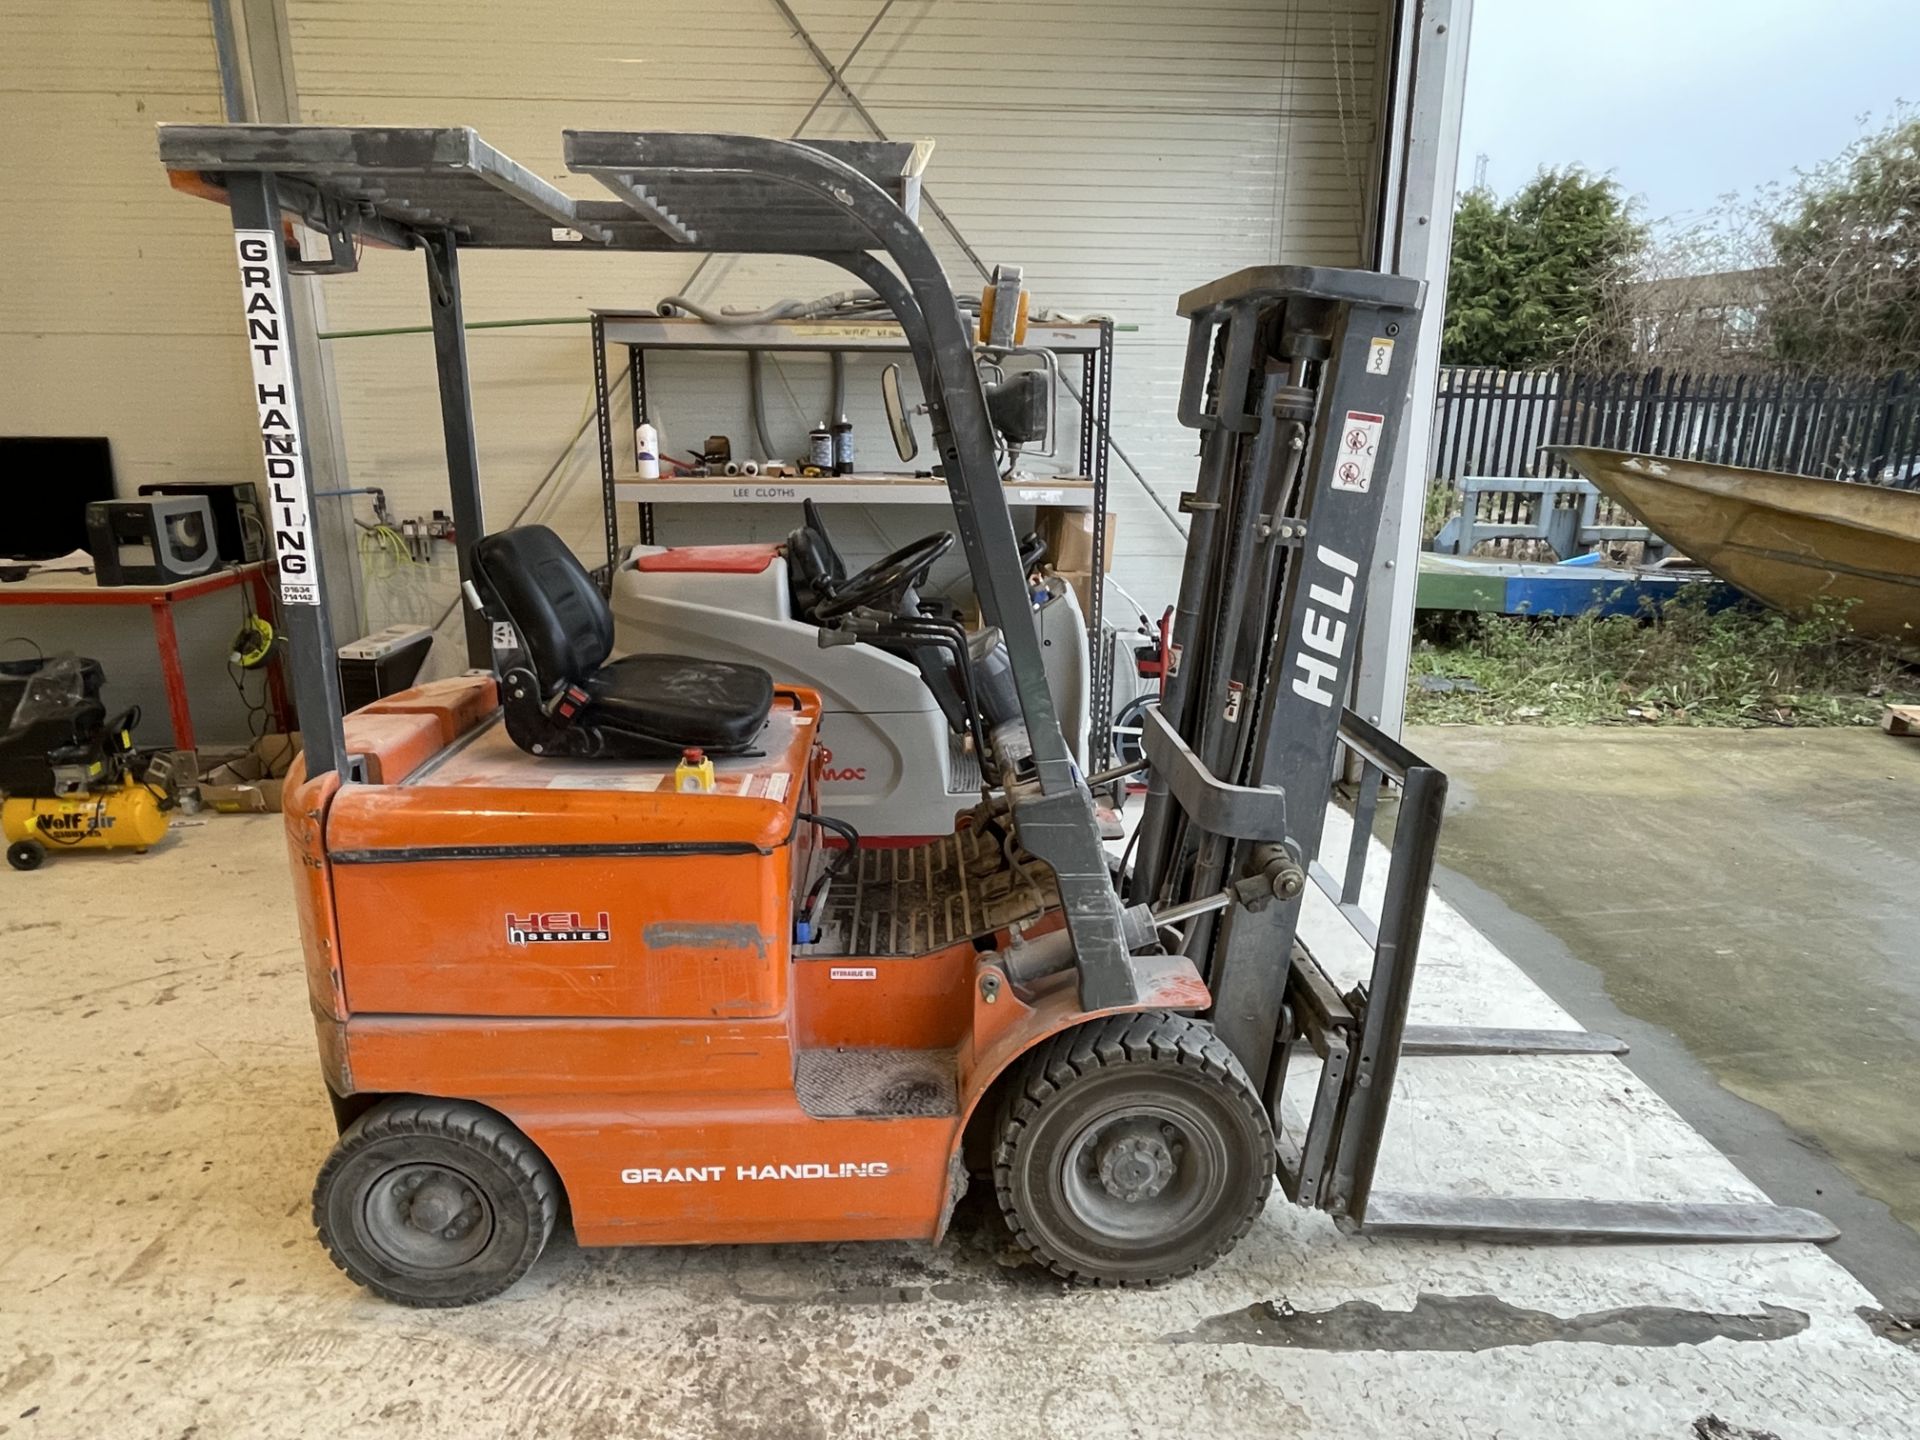 2008 Heli Model HBF15 1500KG Rated Electric Doubemast Forklift S/No. E3611, Odometer Reading: 1279 - Image 12 of 14